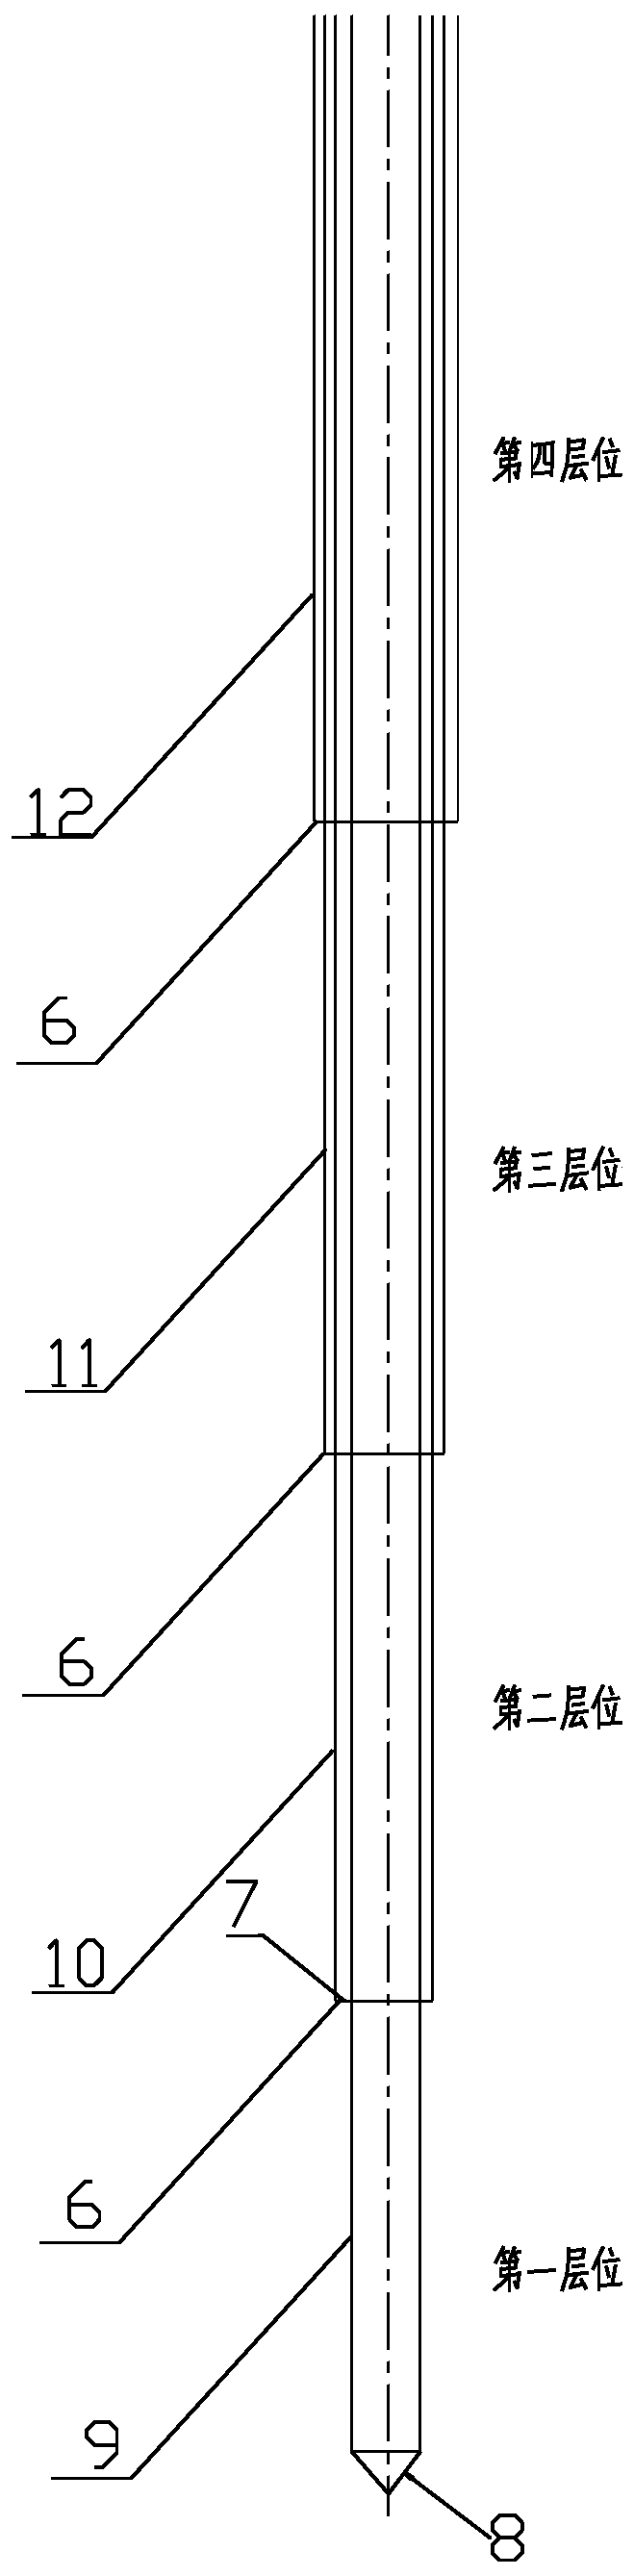 Water level observation pipe capable of realizing layered report of frozen wall intersection conditions